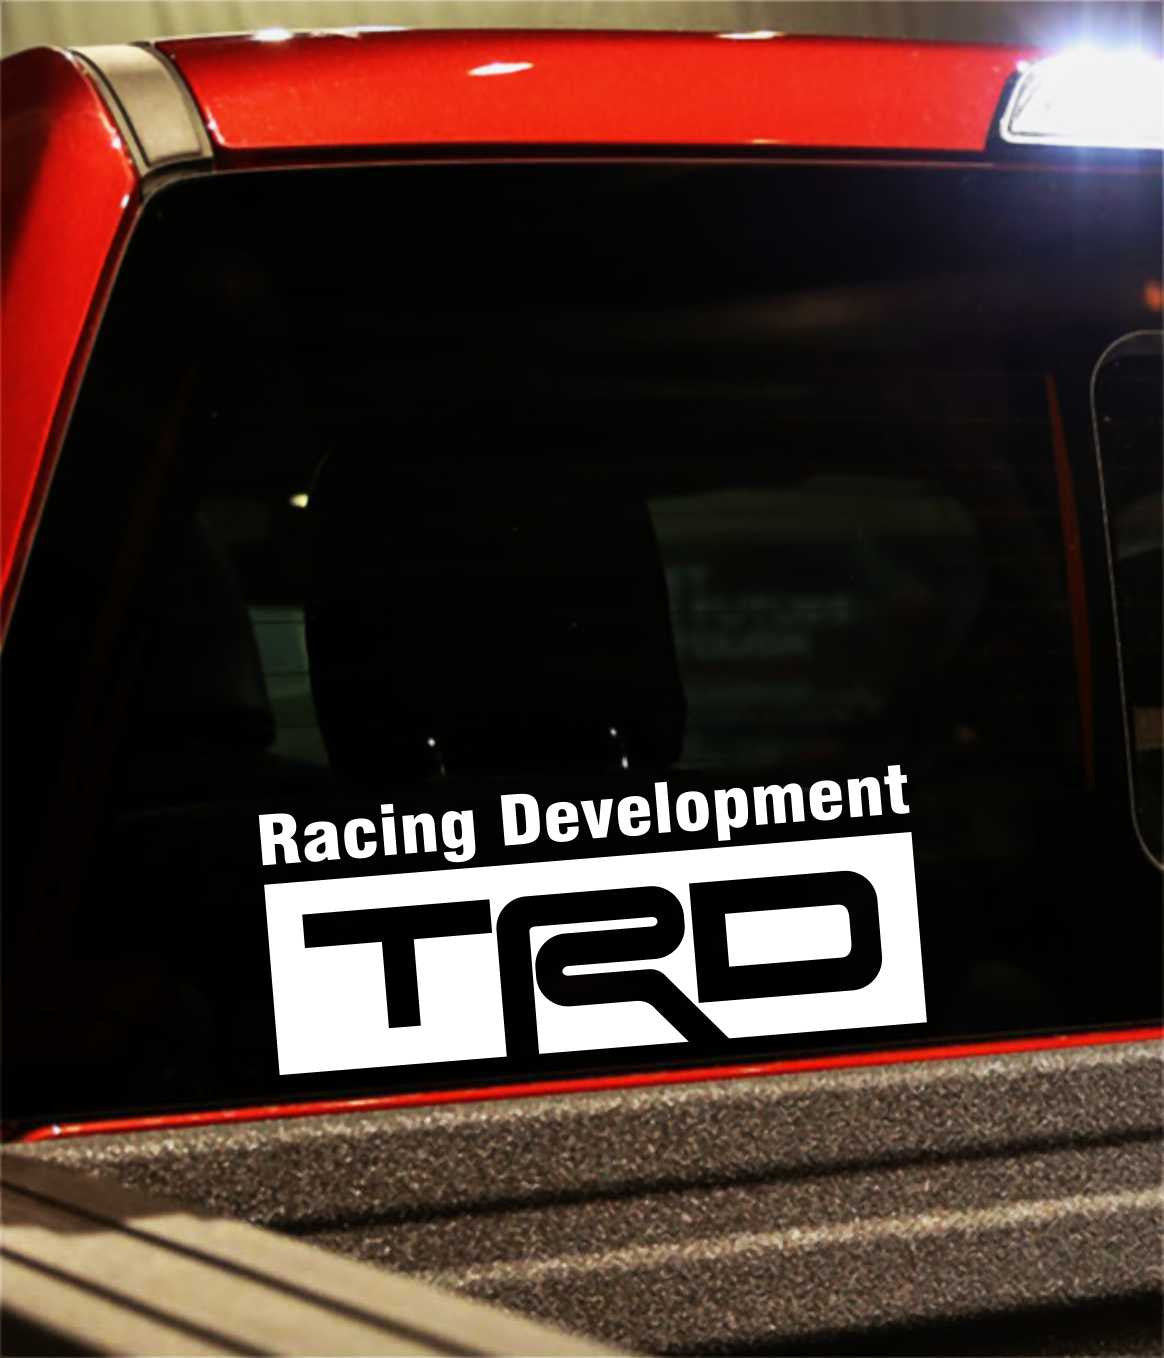 trd performance logo decal - North 49 Decals